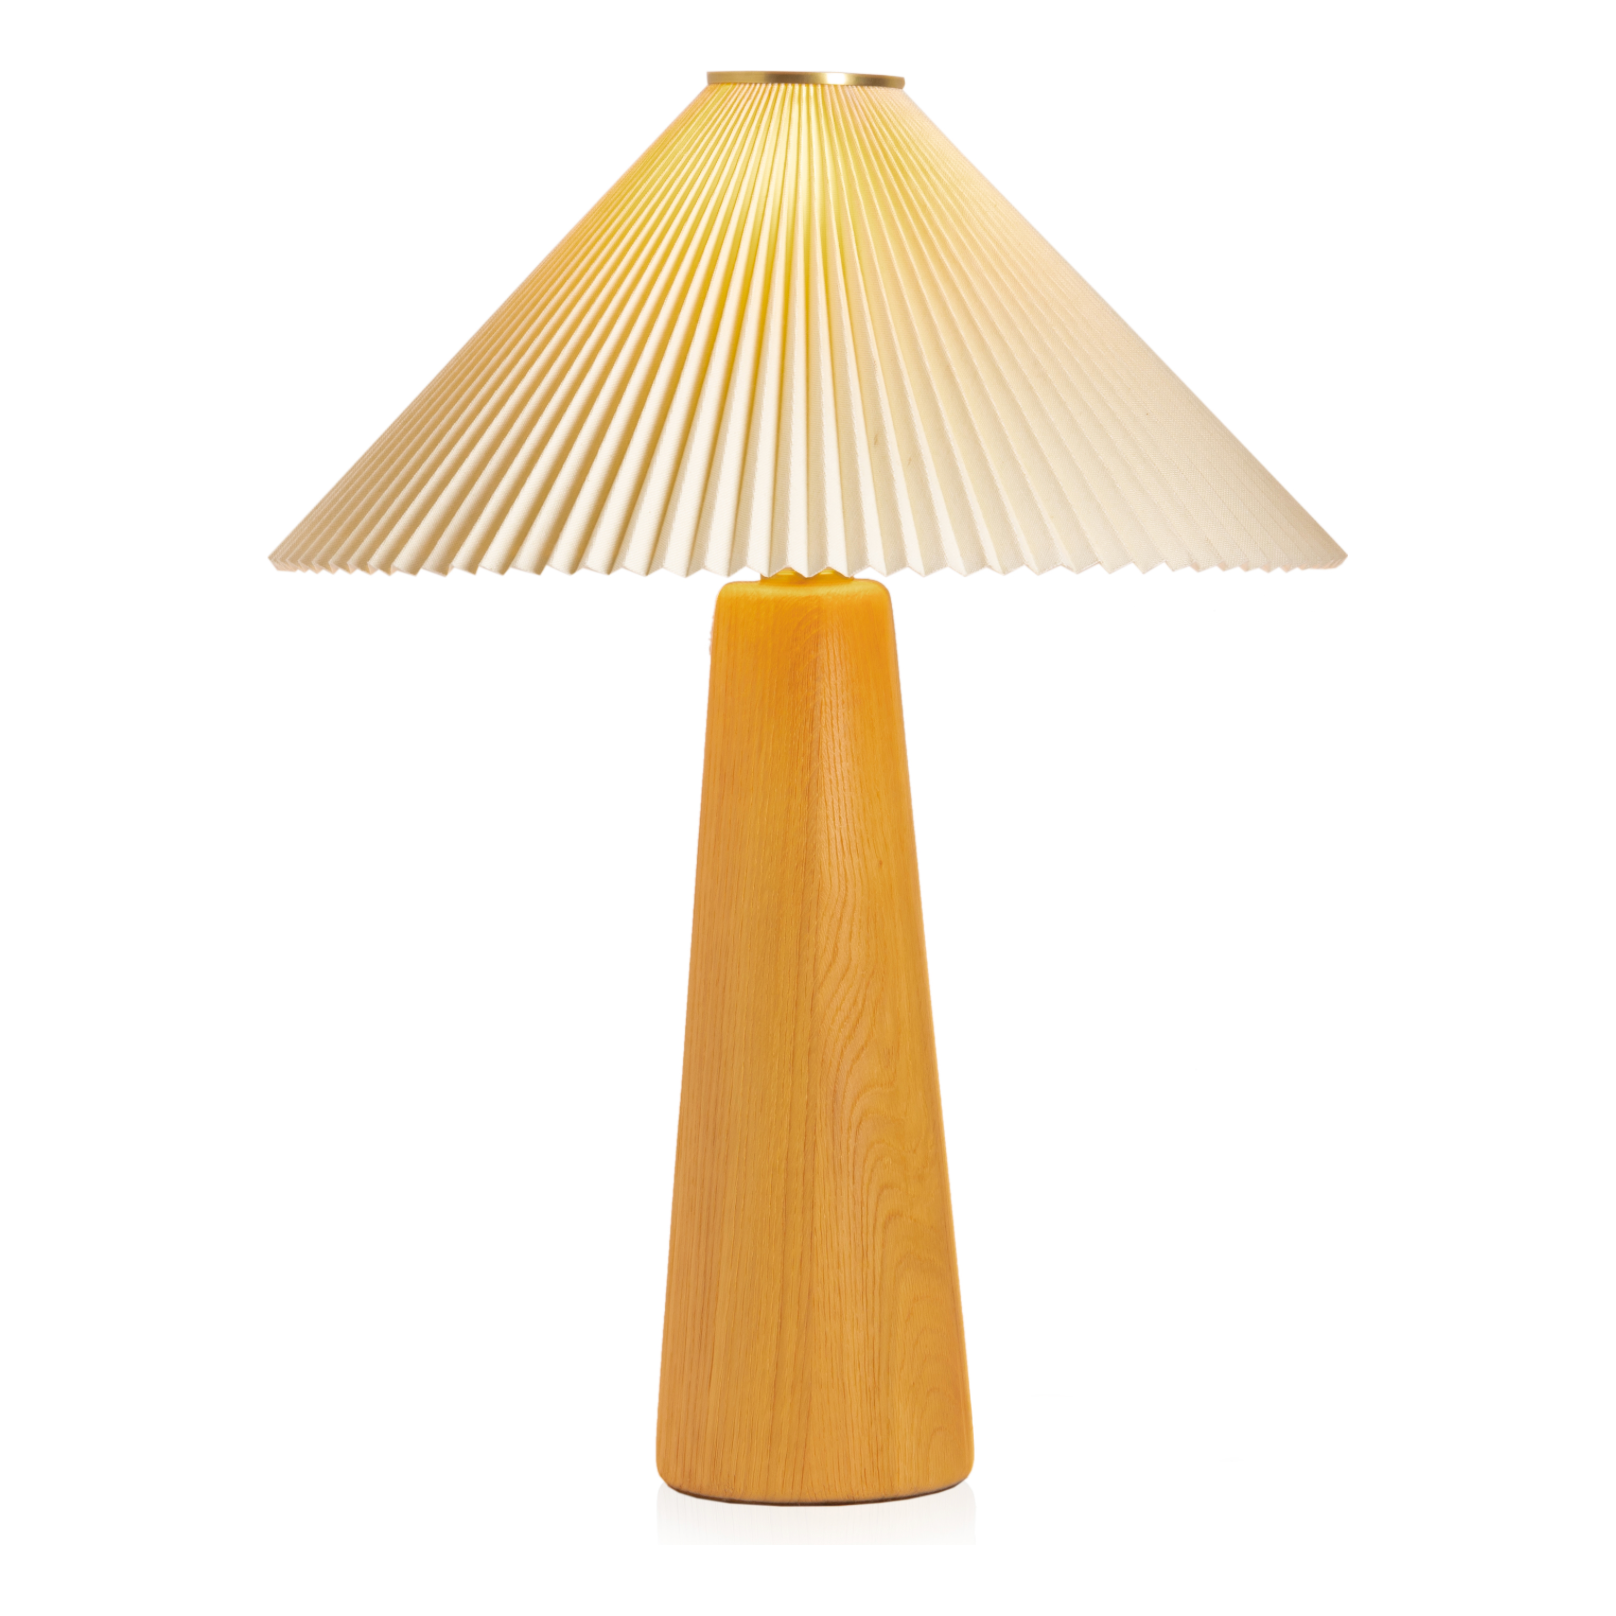 Modern minimal meets traditional. A tapered wood table lamp base is topped with a design-forward pleated shade. Amethyst Home provides interior design, new home construction design consulting, vintage area rugs, and lighting in the Charlotte metro area.